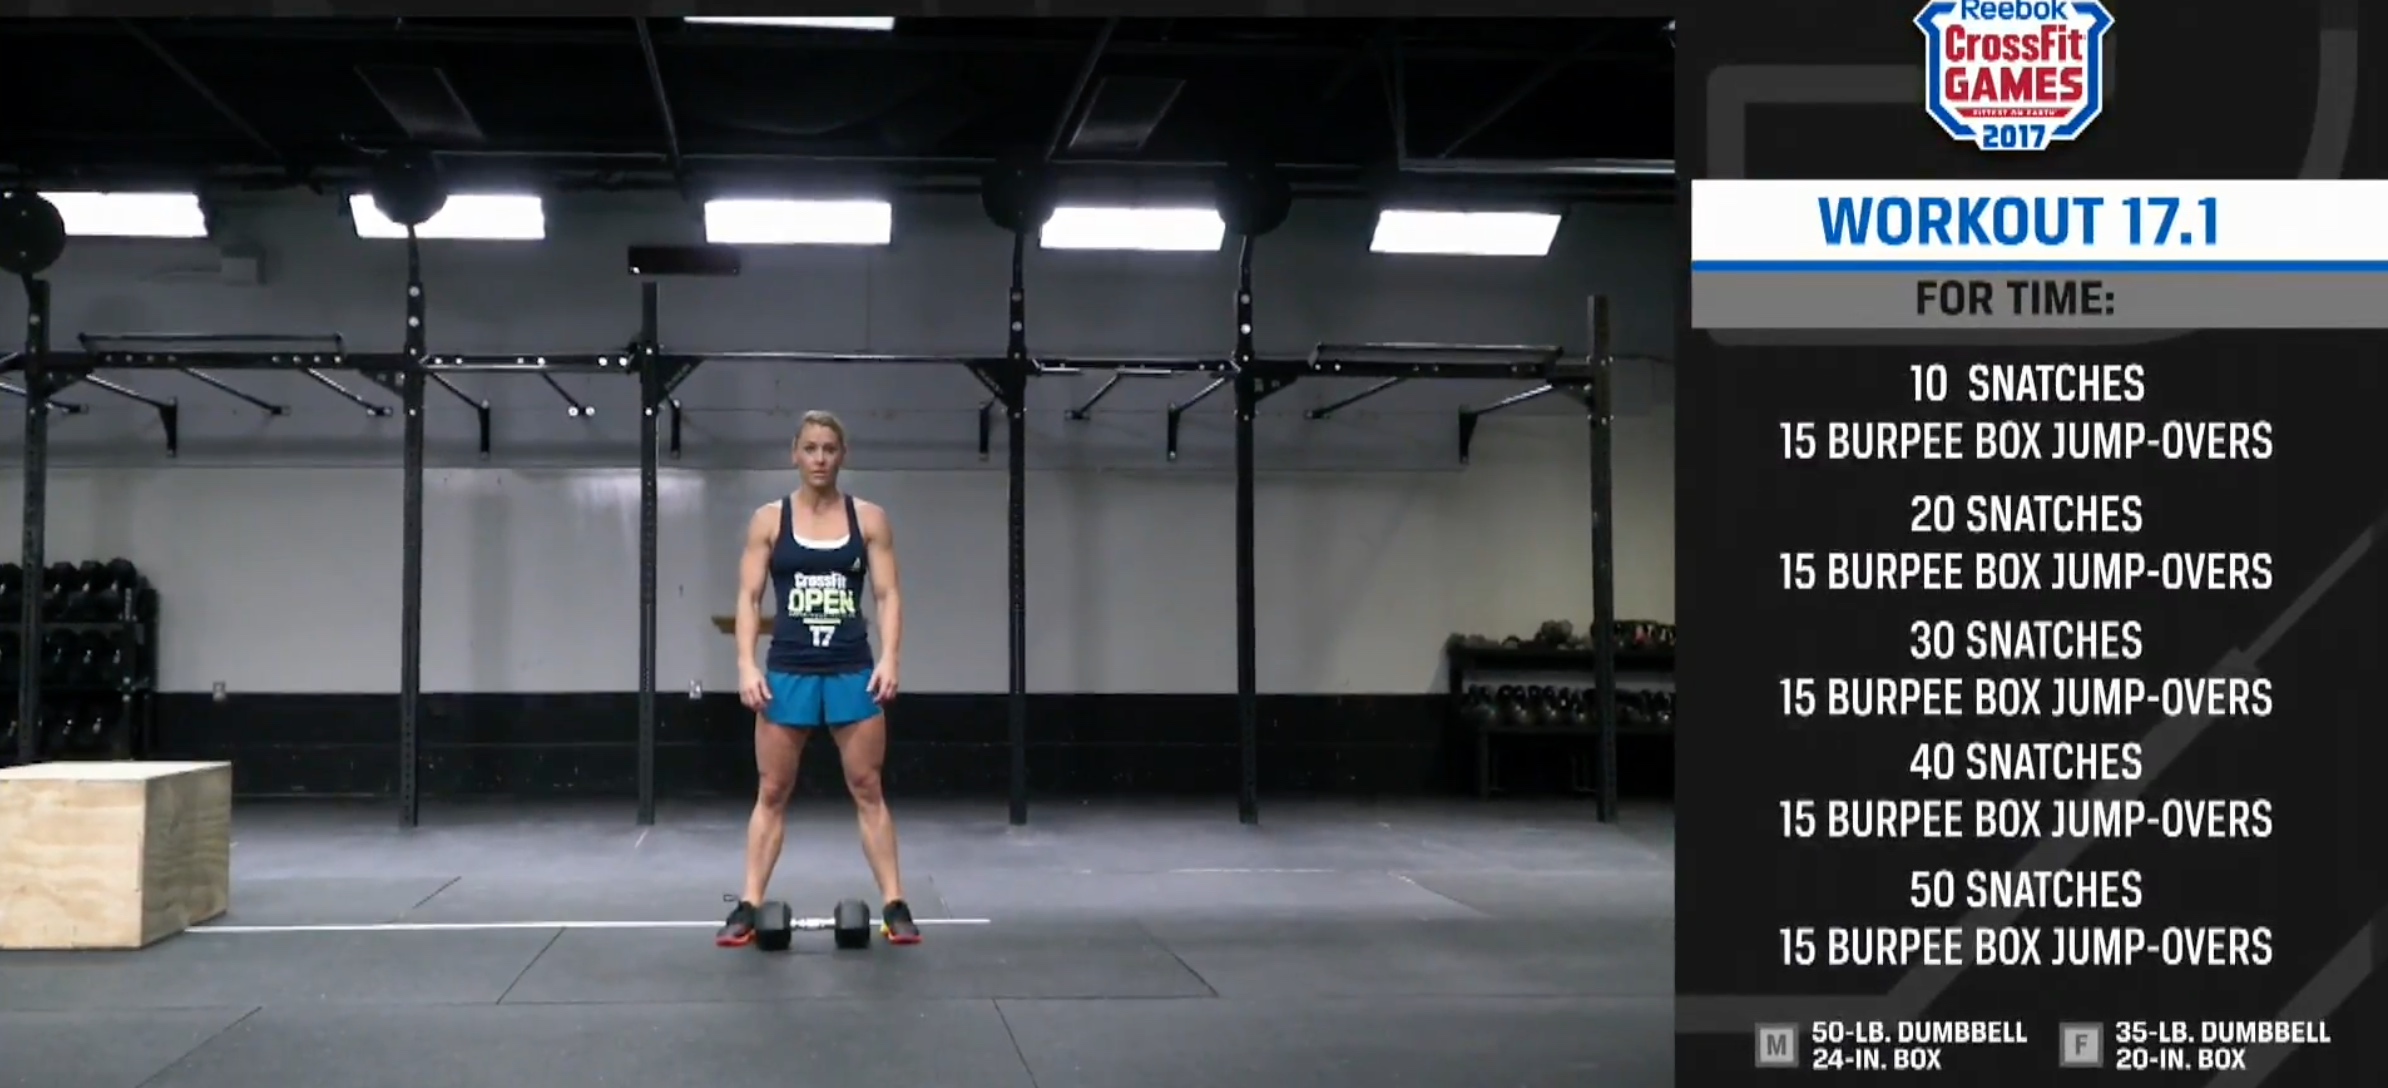 Simple 192 crossfit open workout announcement for Women